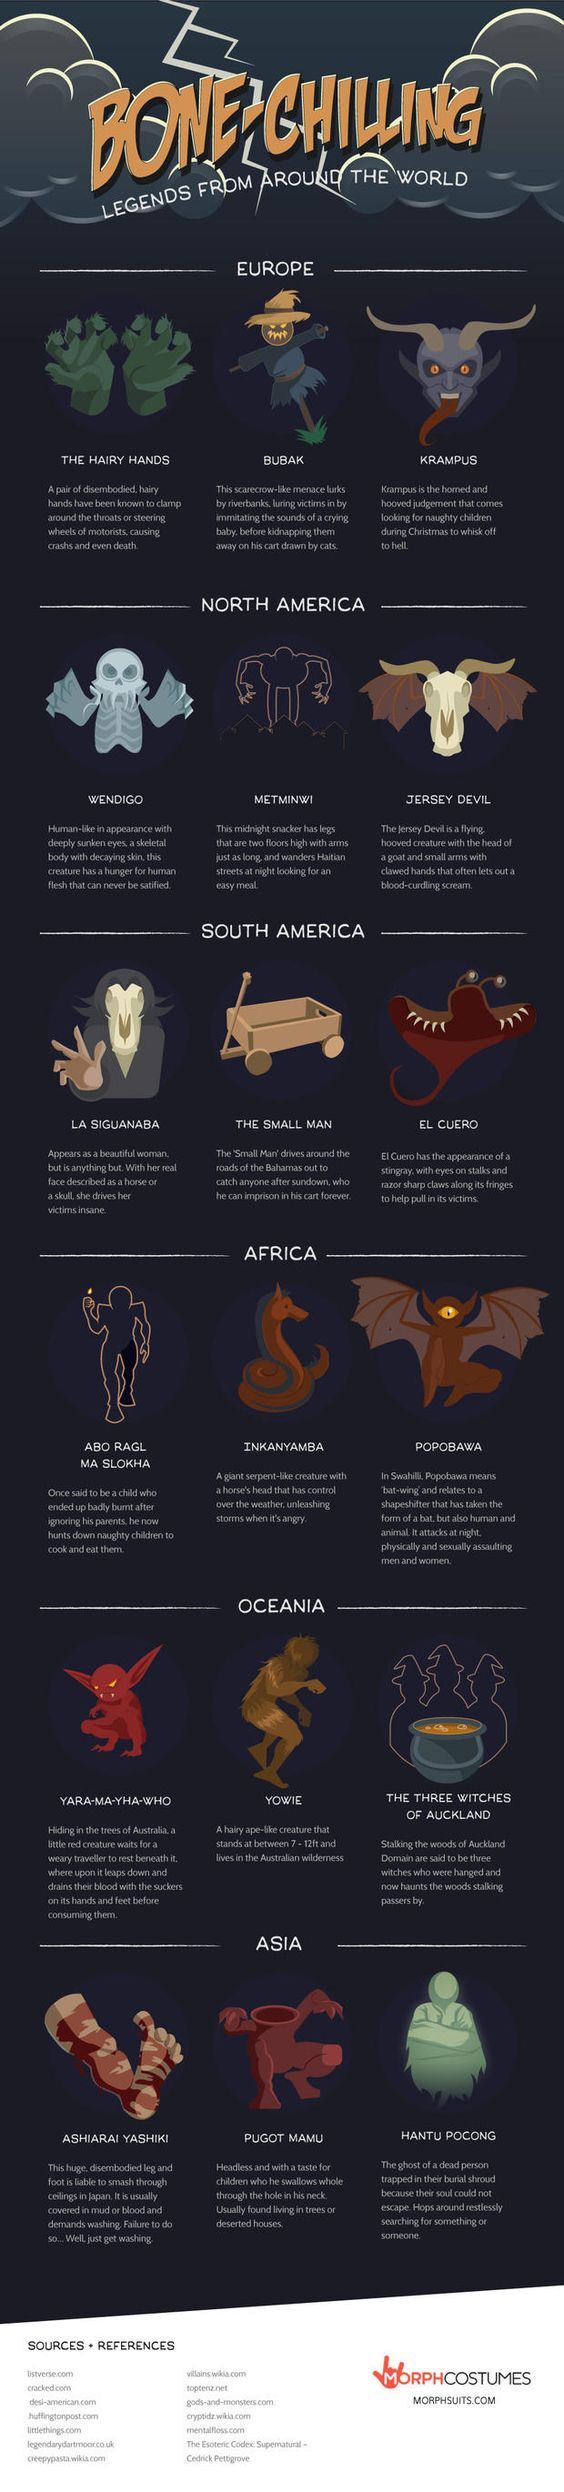 A Spooky Guide to Legendary Creatures From Around the World (Hantu Pocong)